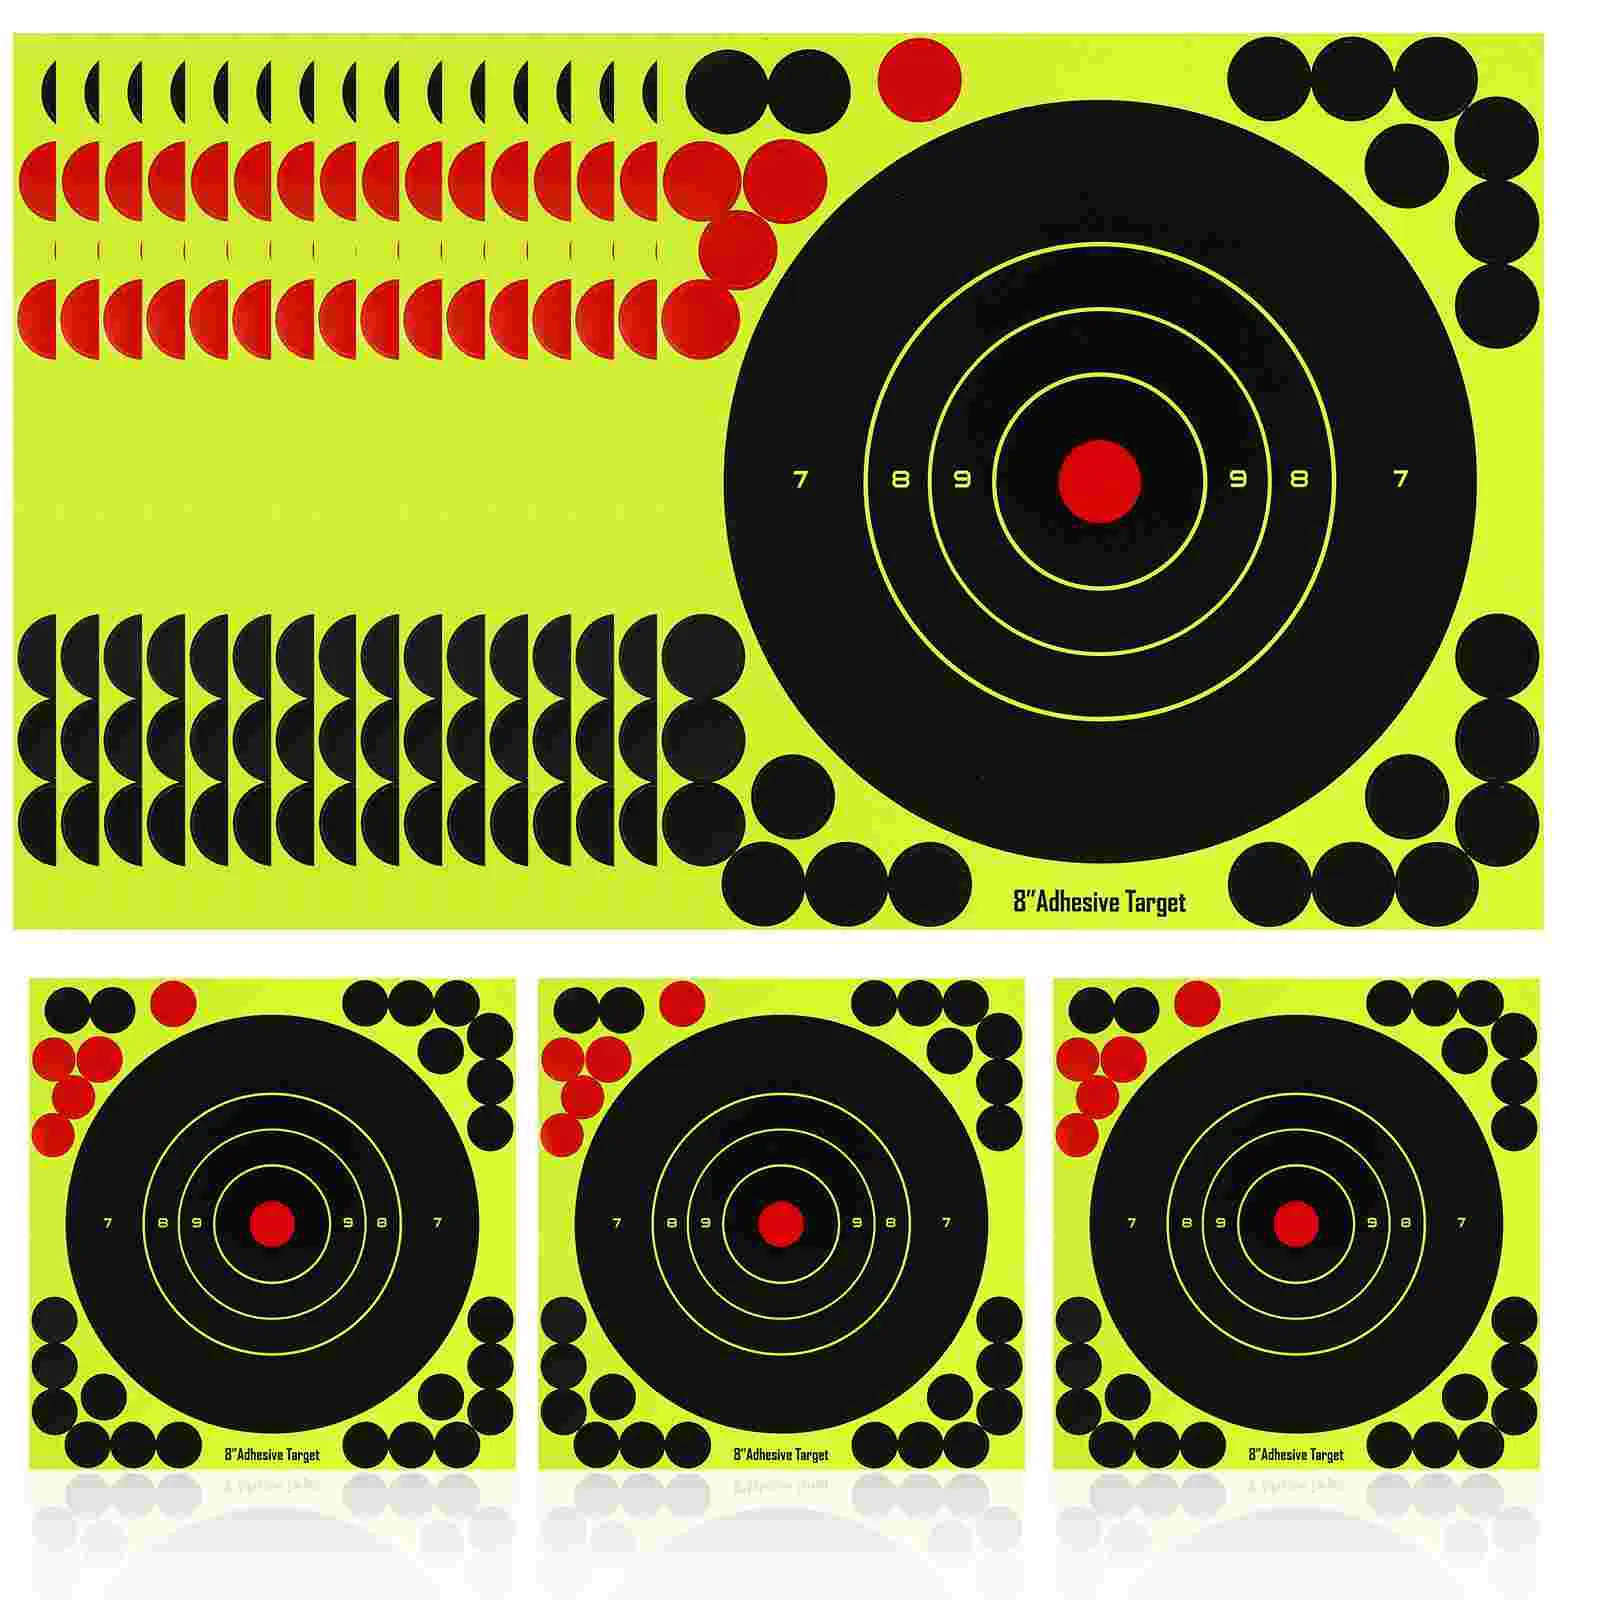 

30 Pcs Stickers Gun Target Paper Circle Targets Round Self-adhesive Splatter Papers for Sports Zone Targeted Aiming